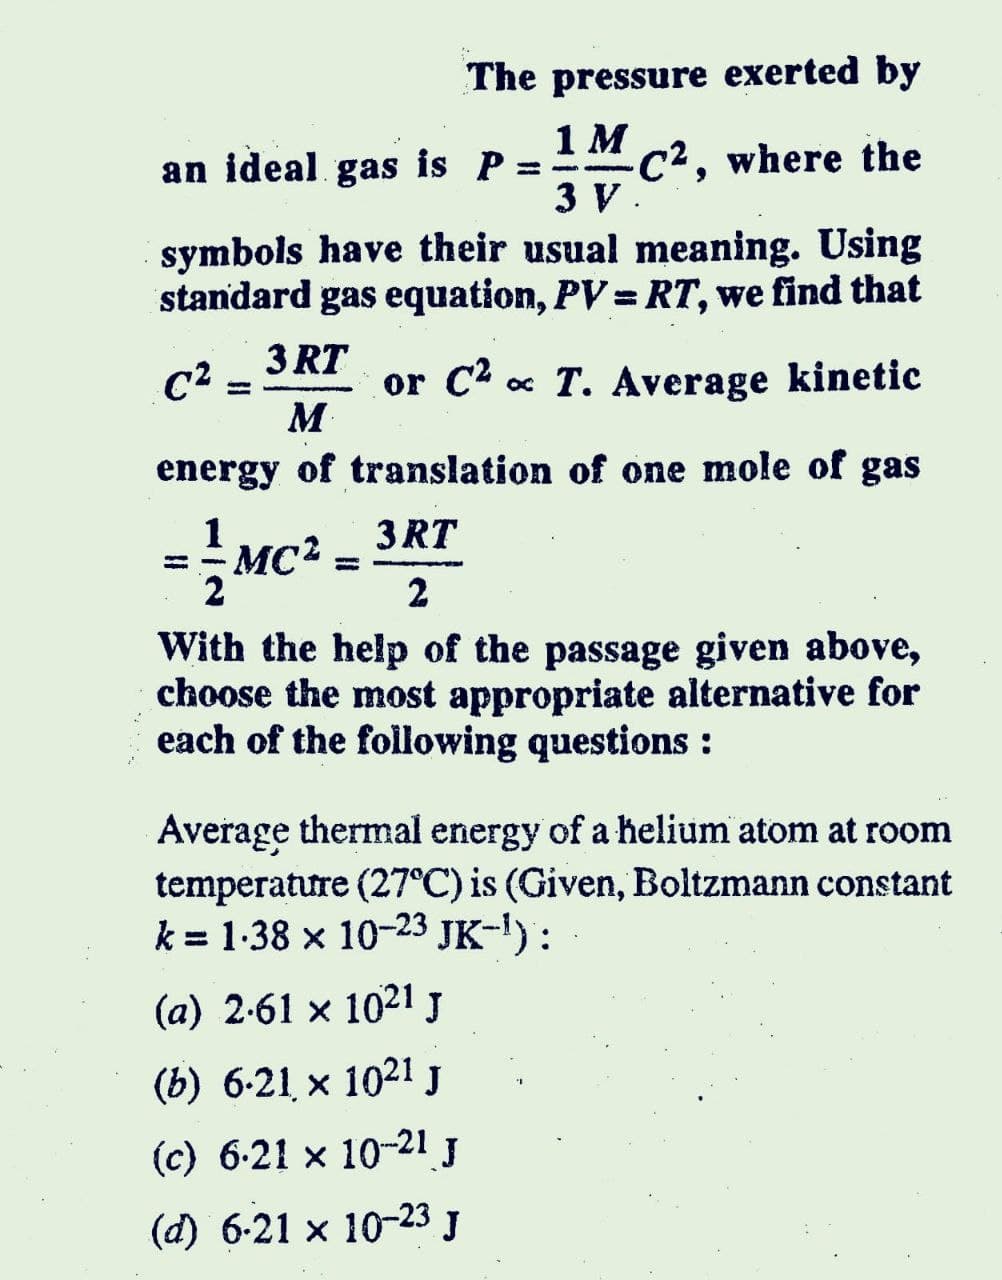 The pressure exerted by
1M
an ideal gas is P
C², where the
3 V.
symbols have their usual meaning. Using
standard gas equation, PV = RT, we find that
C2
M
3 RT
or C2 x
« T. Average kinetic
%3D
energy of translation of one mole of gas
1
MC2
3 RT
%3D
2
With the help of the passage given above,
choose the most appropriate alternative for
each of the following questions :
Average thermal energy of a helium atom at room
temperature (27°C) is (Given, Boltzmann constant
k = 1-38 x 10-23 JK-I):
(a) 2-61 x 1021 J
(b) 6-21 x 1021 J
(c) 6-21 x 10-21 J
(d) 6-21 x 10-23 J
